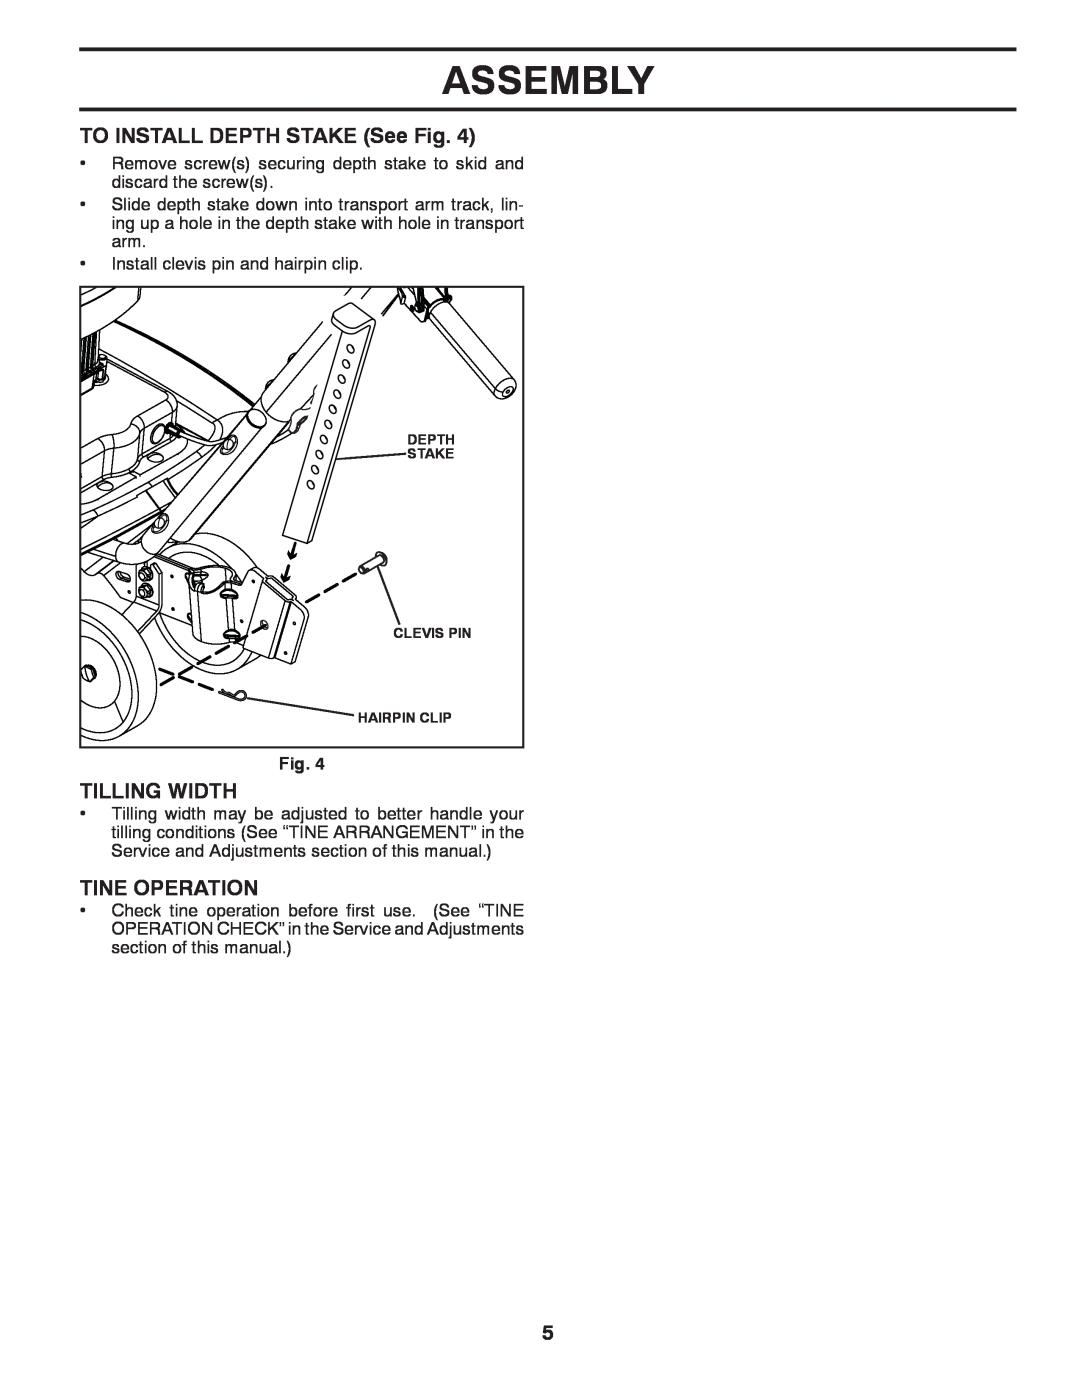 Poulan 433552, VF550, 96082001500 manual TO INSTALL DEPTH STAKE See Fig, Tilling Width, Tine Operation, Assembly 